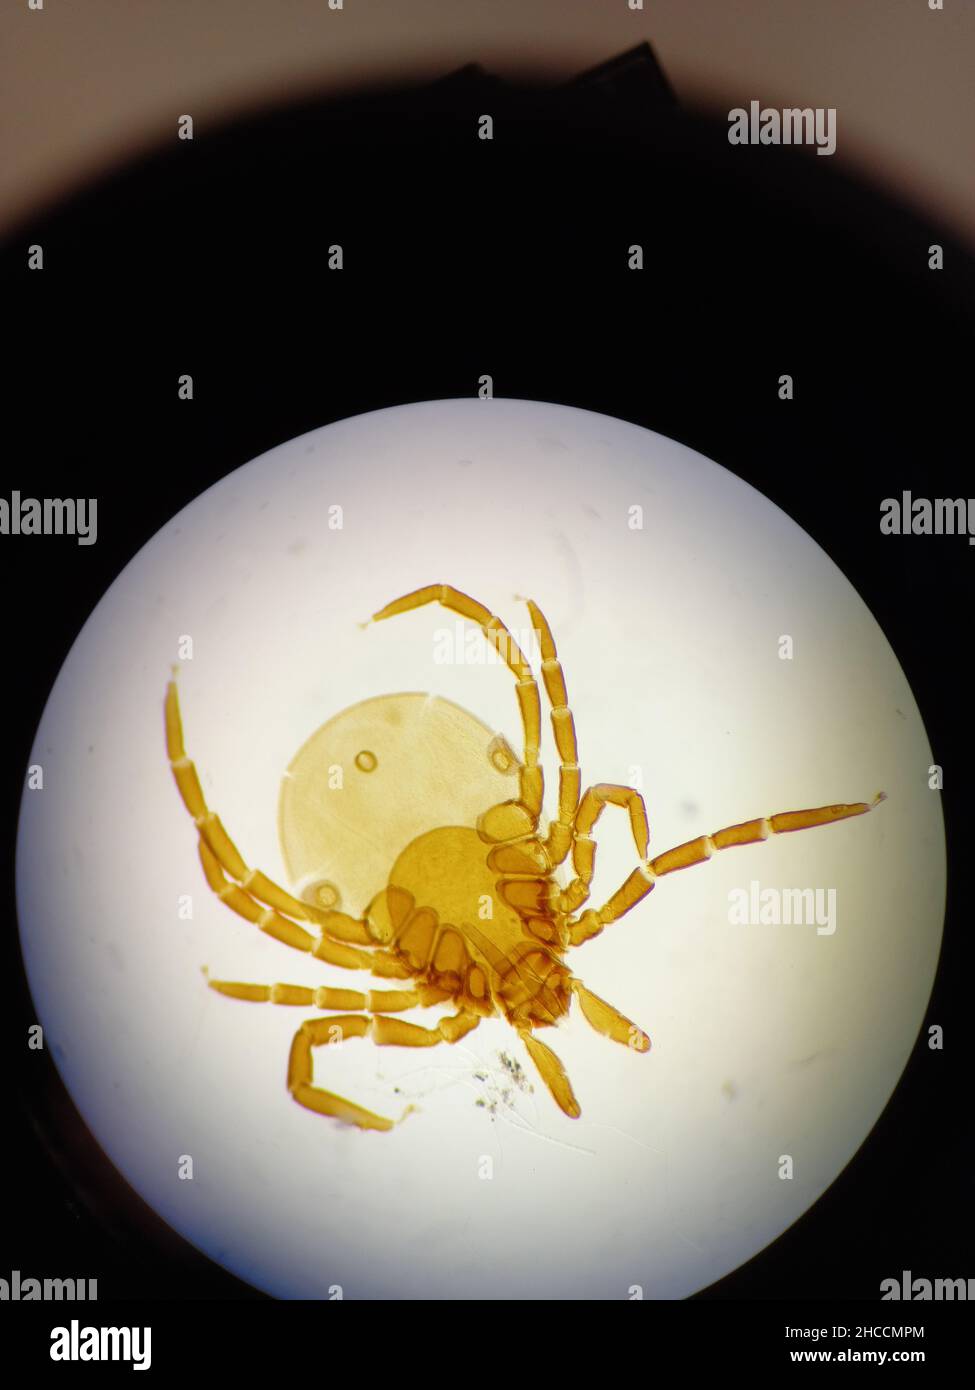 Ixodid tick sous microscope. Banque D'Images